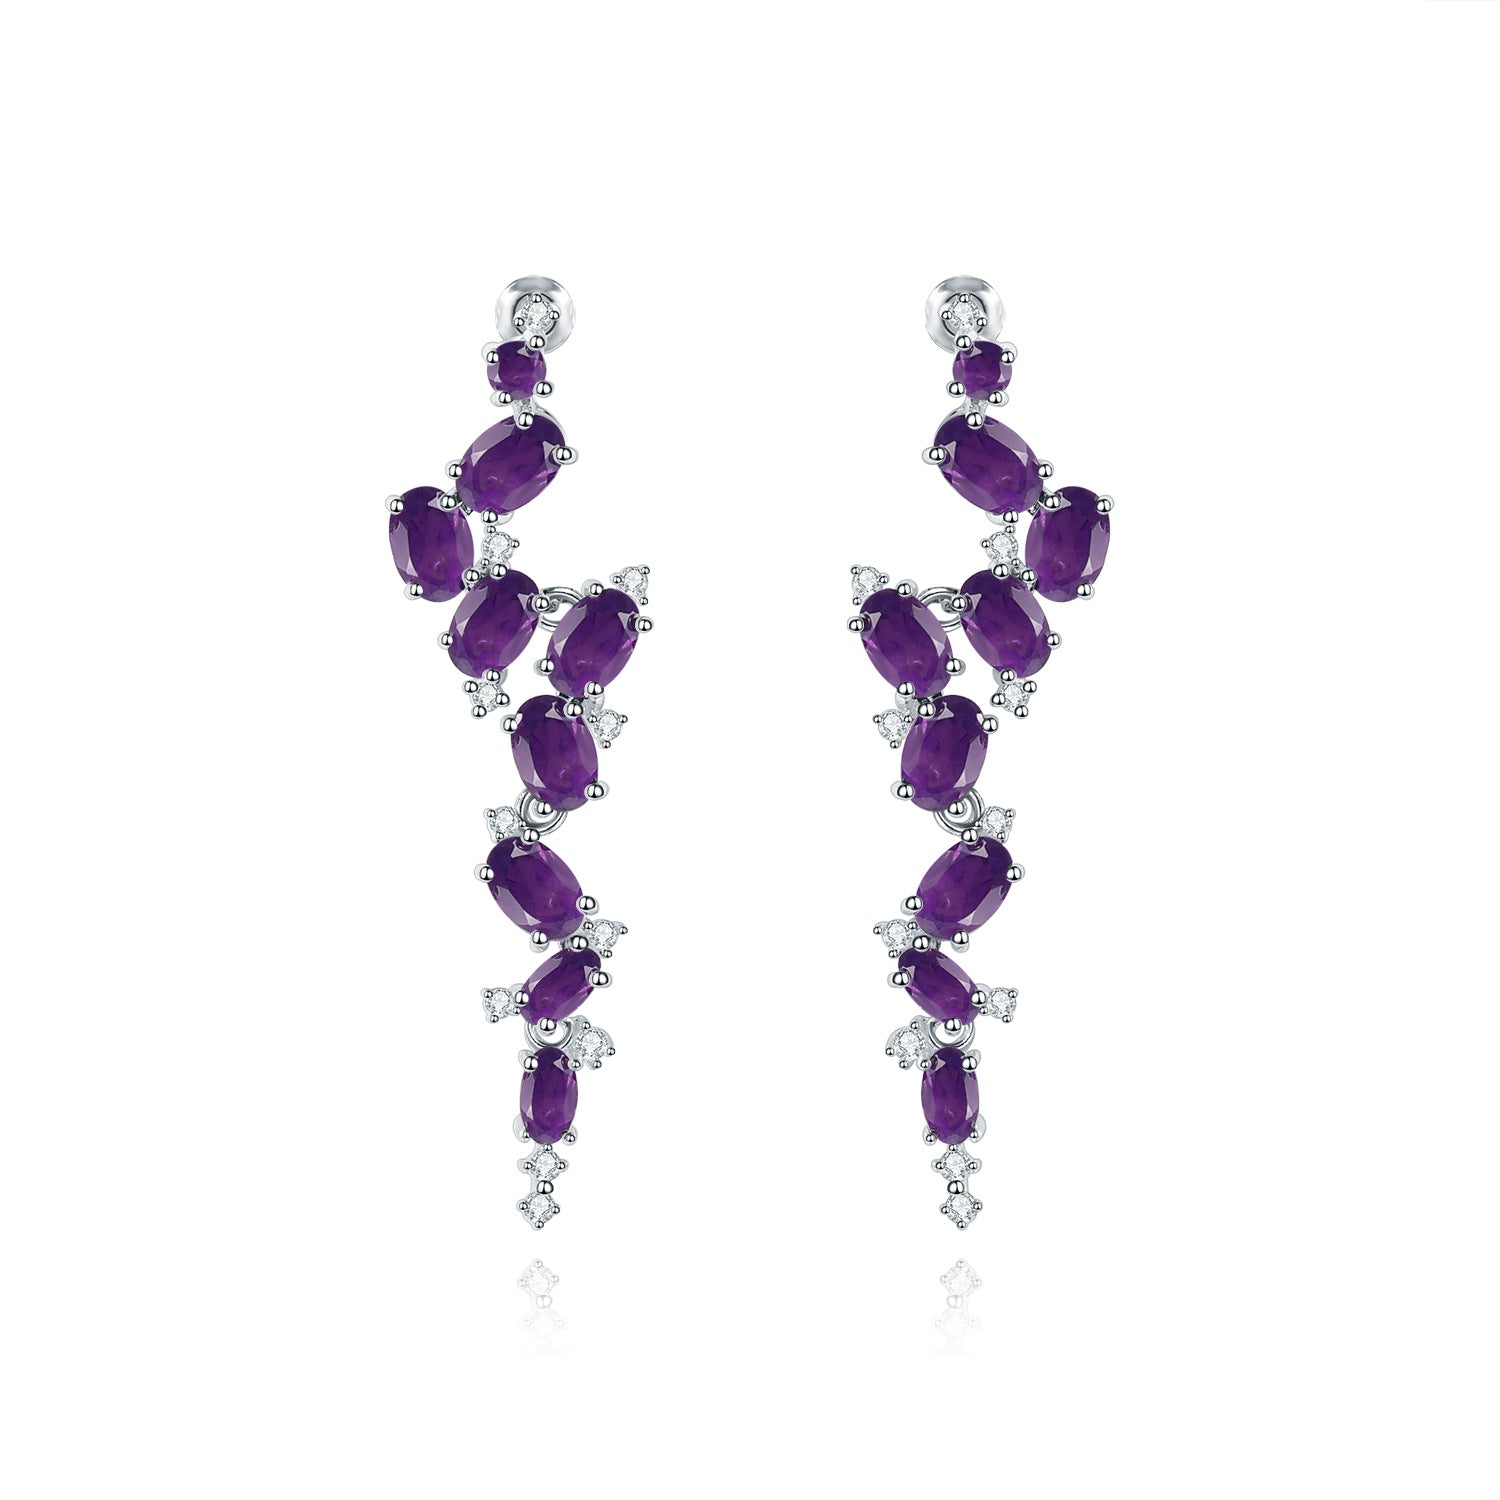 French Romantic Style Inlaid Colourful Gemstones Long Beading Silver Drop Earrings for Women